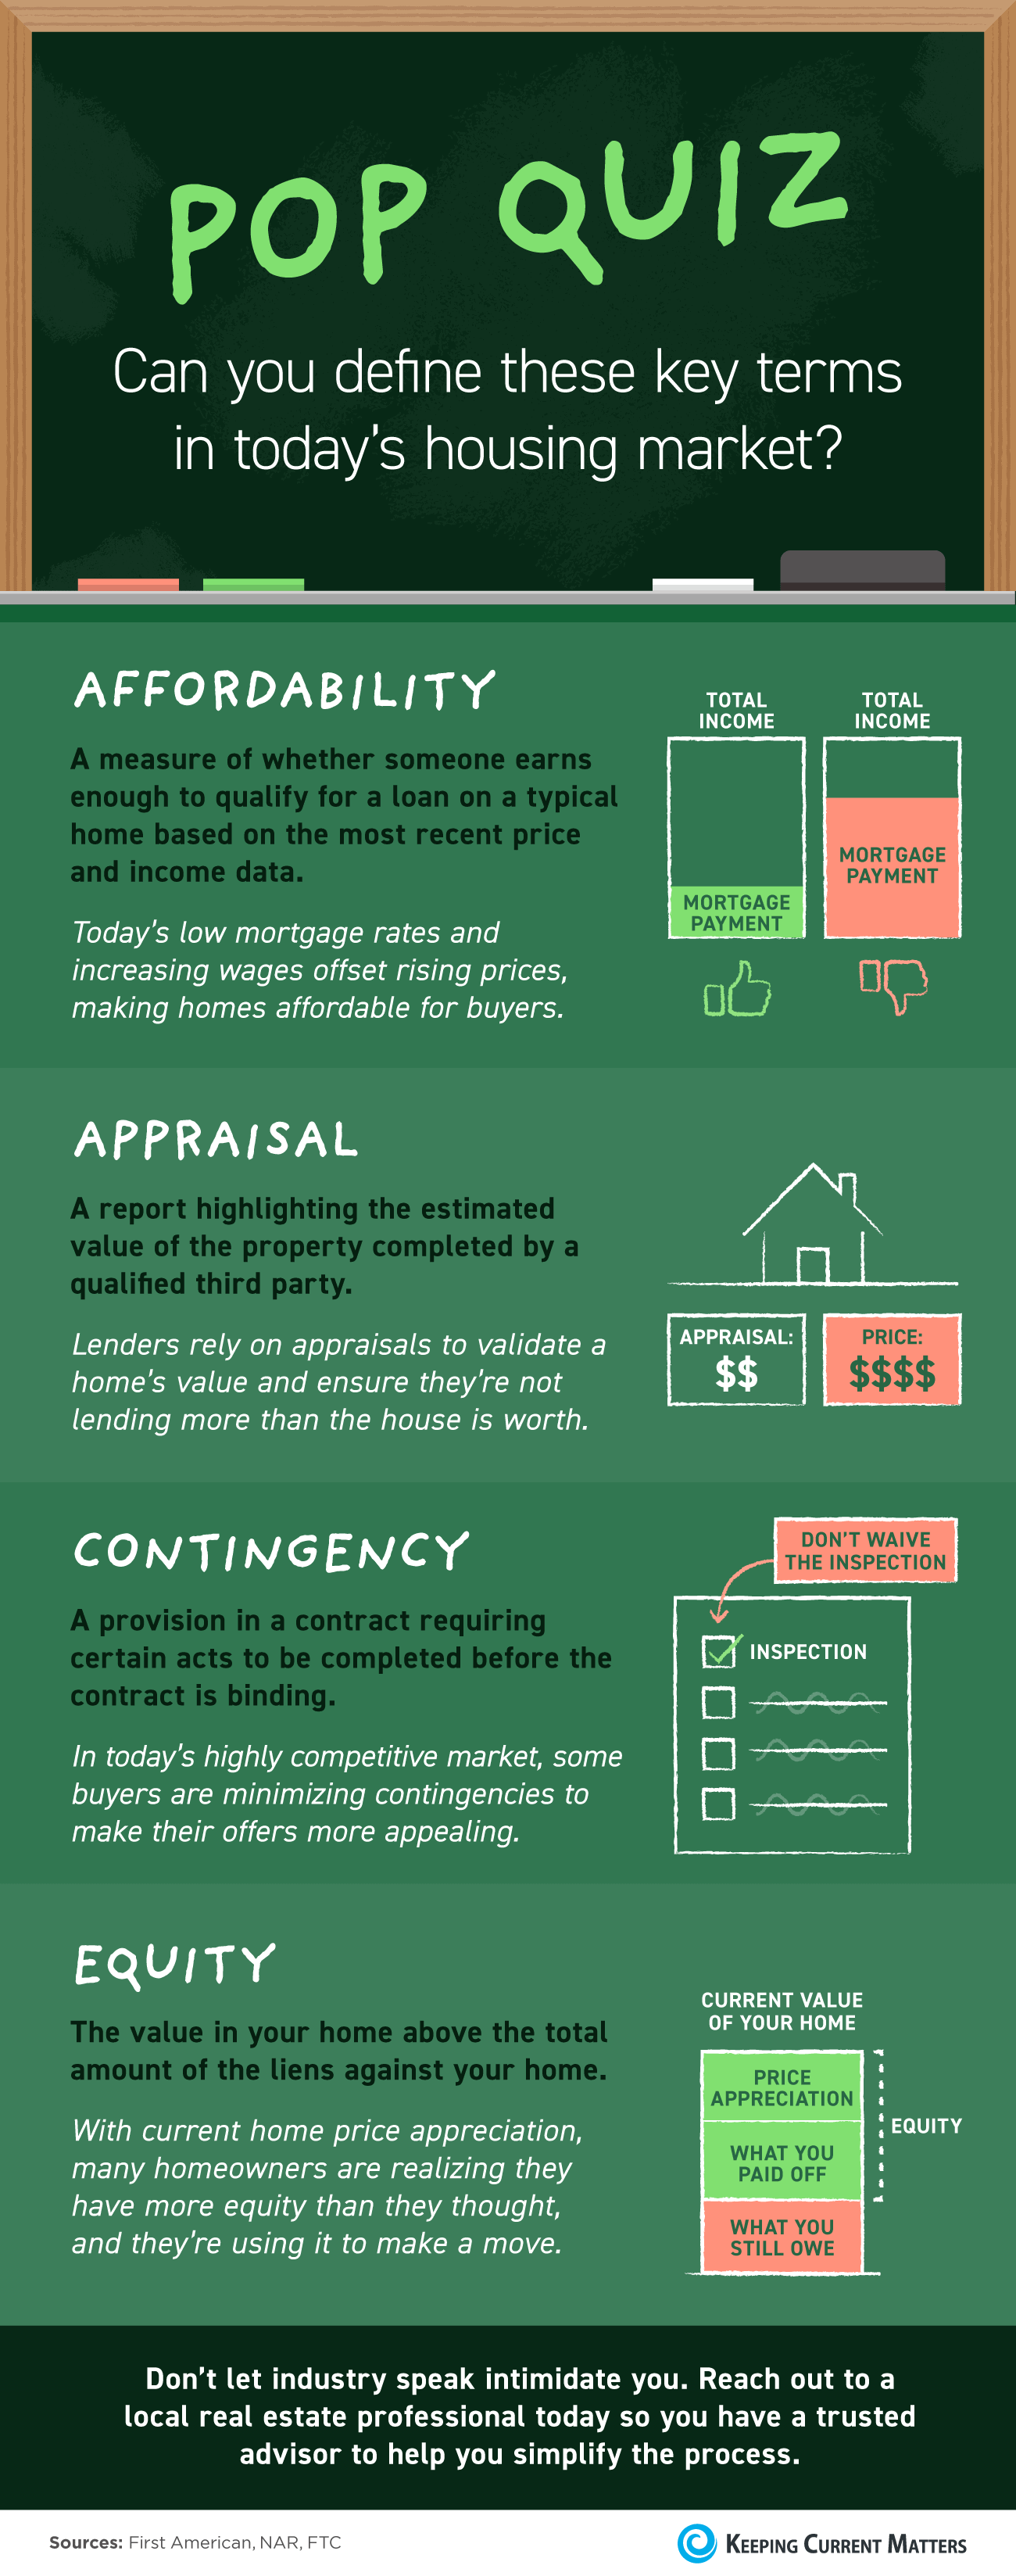 Pop Quiz: Can You Define These Key Terms in Today’s Housing Market? [INFOGRAPHIC] | Keeping Current Matters